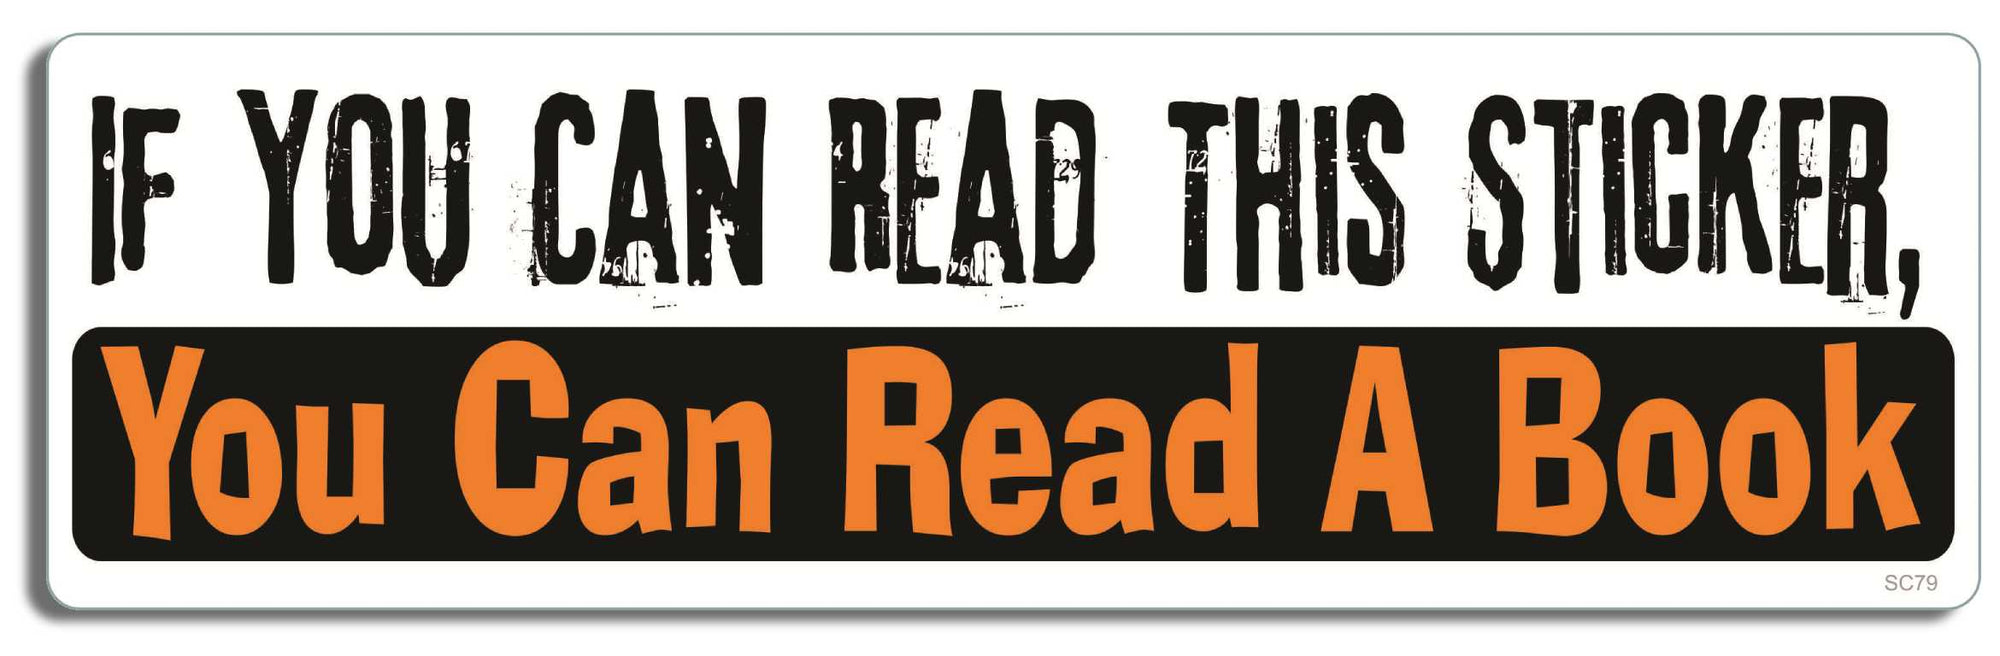 If you can read this Sticker-, you can read a book - 3" x 10" Bumper Sticker--Car Magnet- -  Decal Bumper Sticker-political Bumper Sticker Car Magnet If you can read this sticker, you-  Decal for carsBook lover, clever, educational